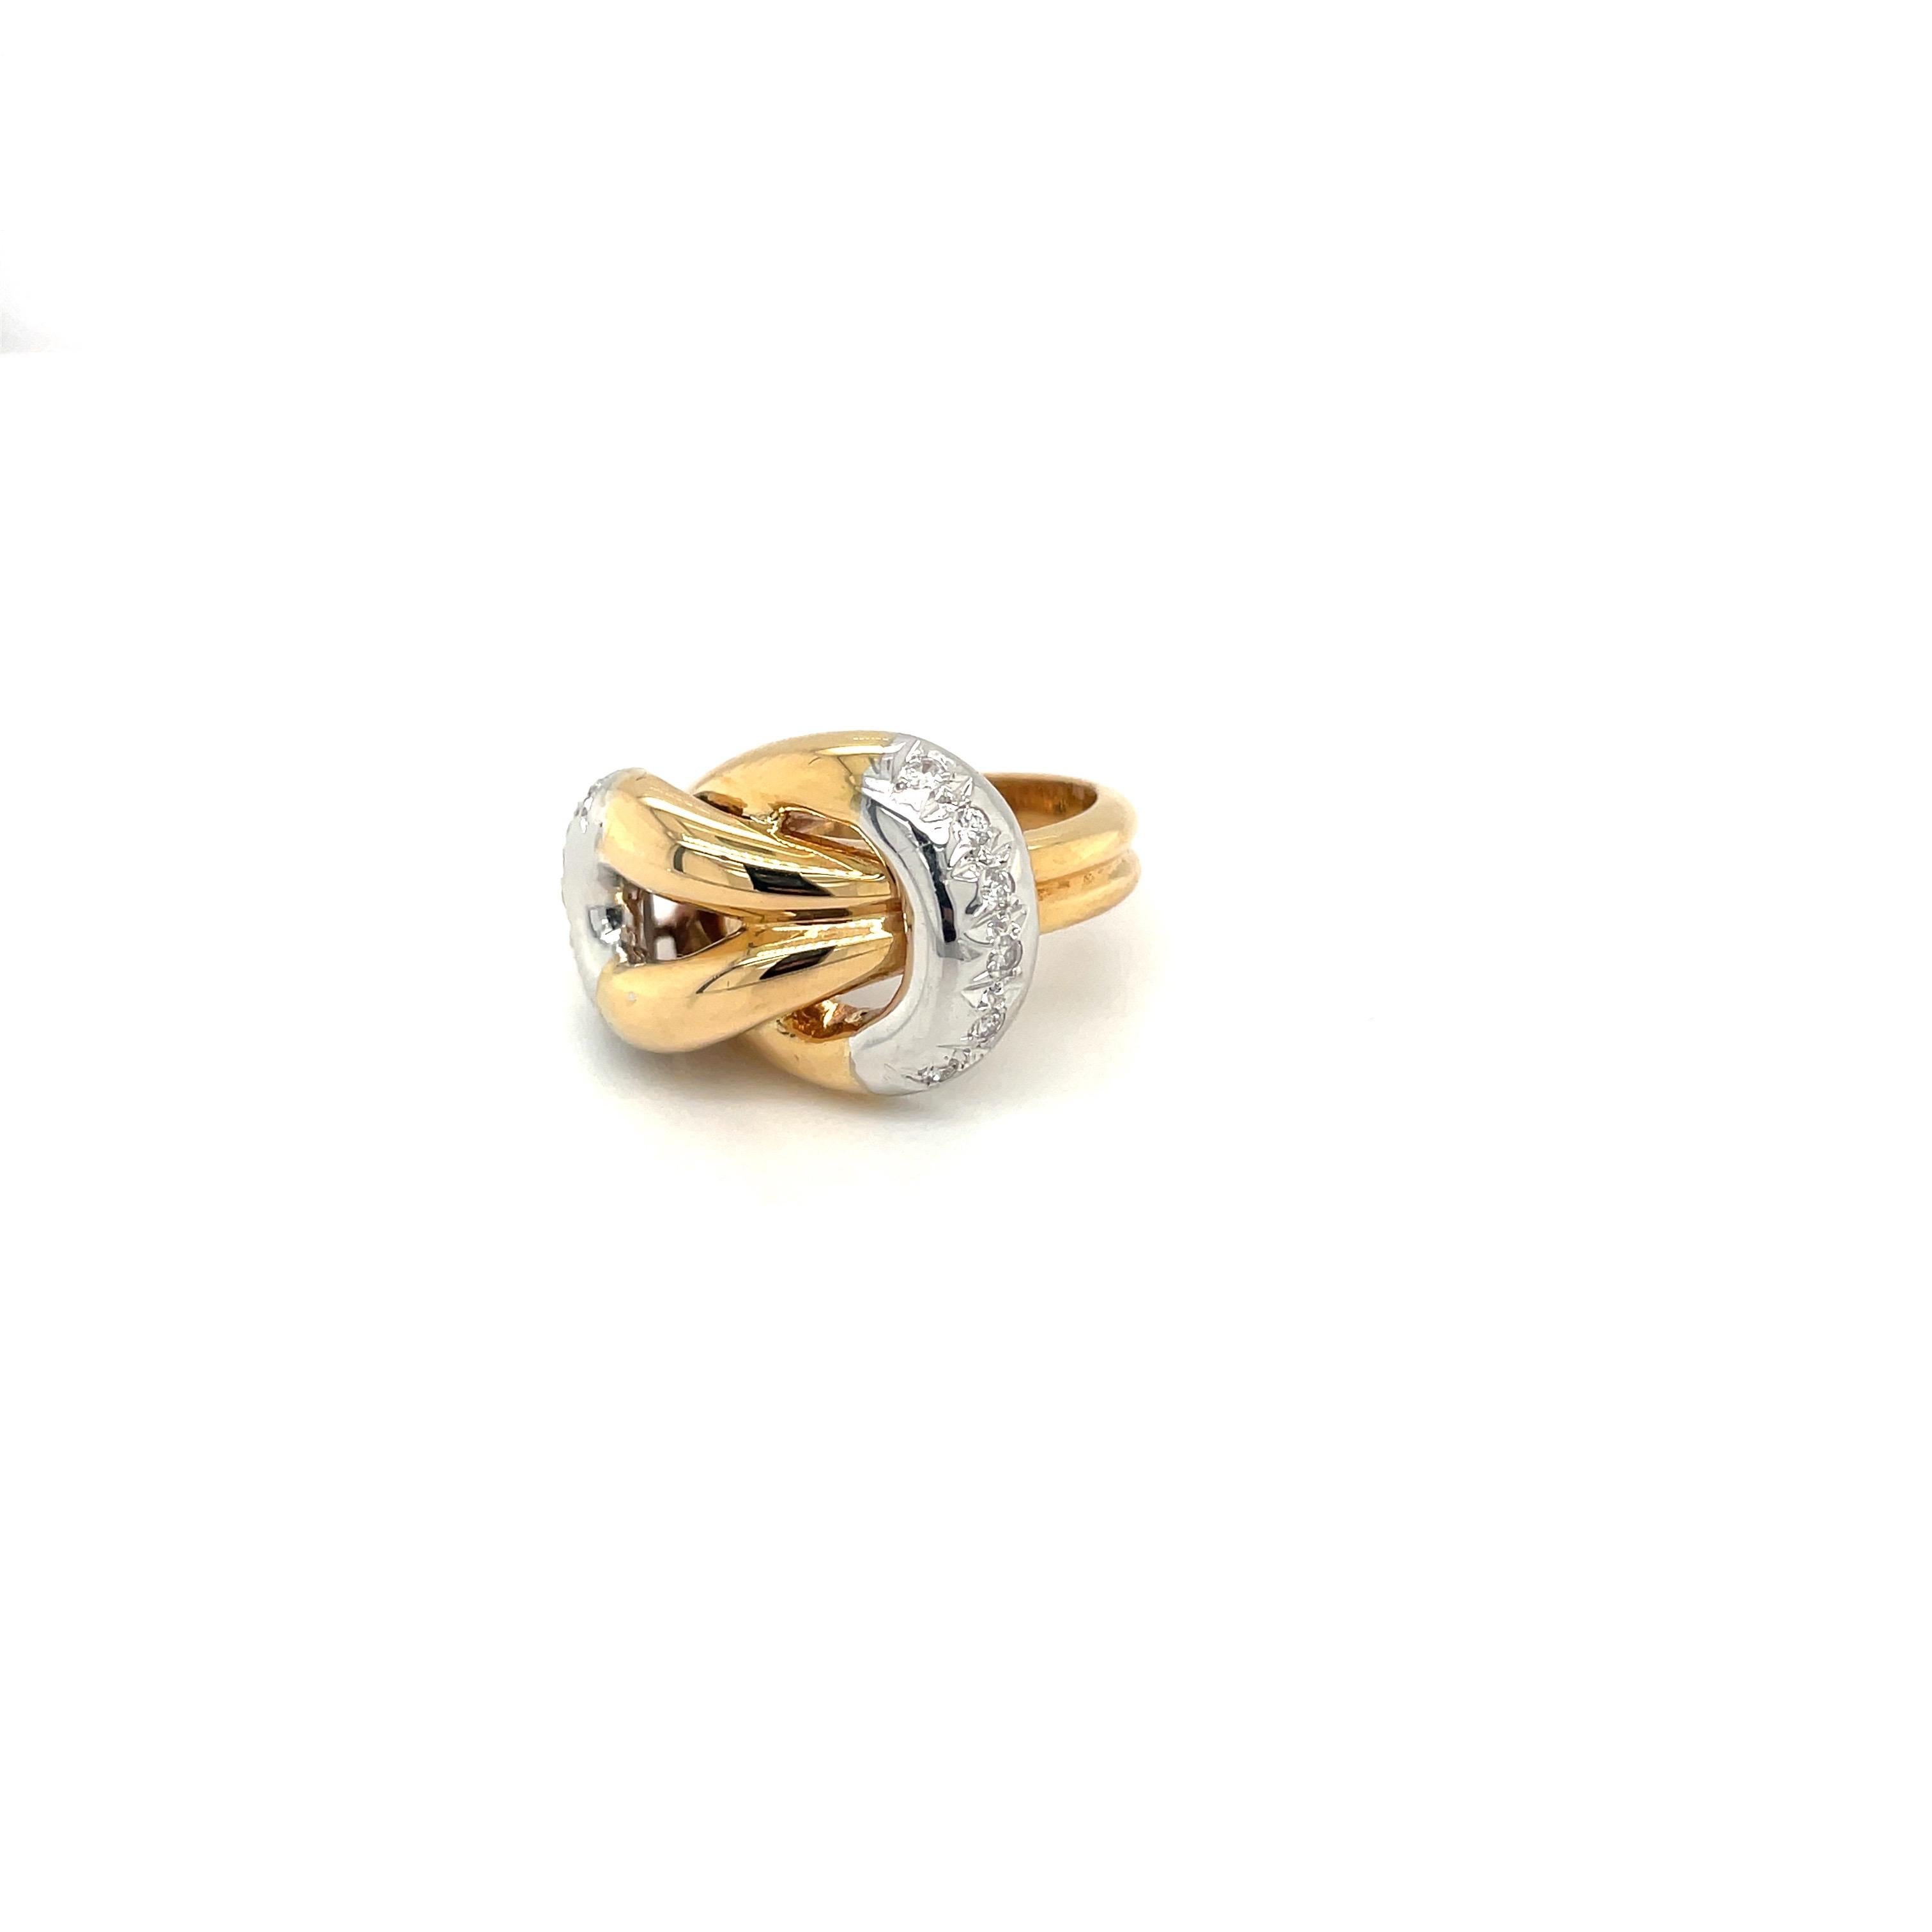 Classic 18 karat yellow and white gold knot ring. Round brilliant diamonds 0.23 carats are set in the white gold ends of the ring.
Ring size 5.5